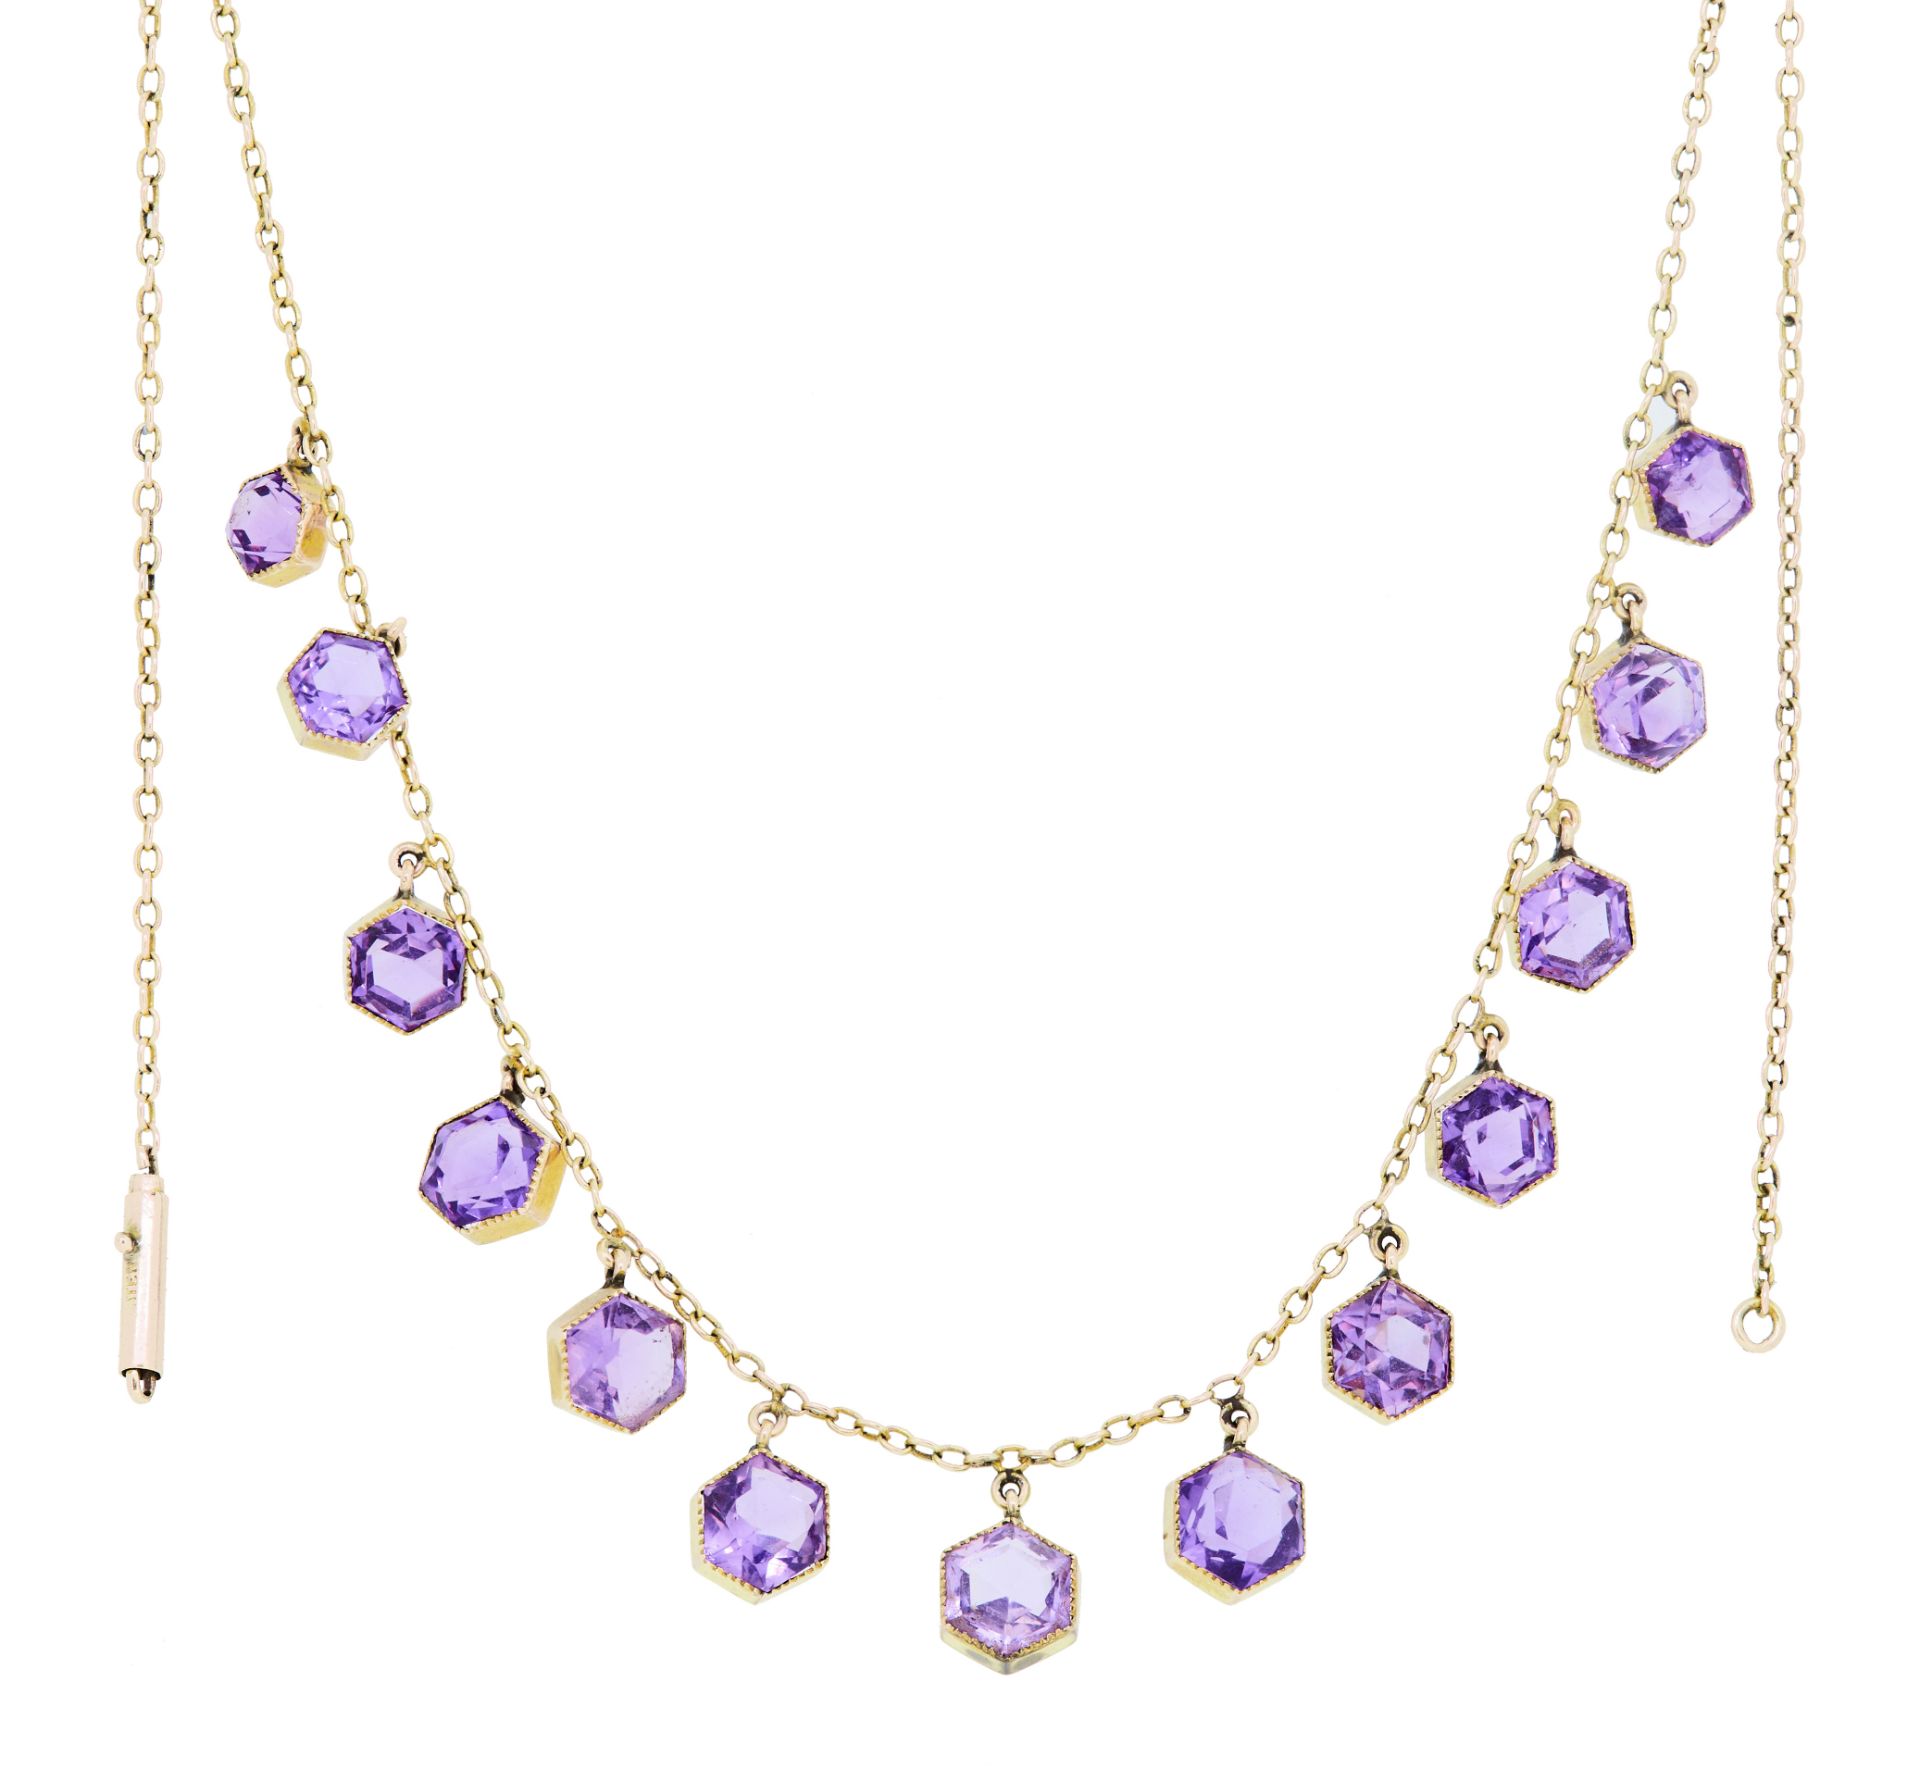 ANTIQUE VICTORIAN AMETHYST NECKLACE - Image 3 of 3